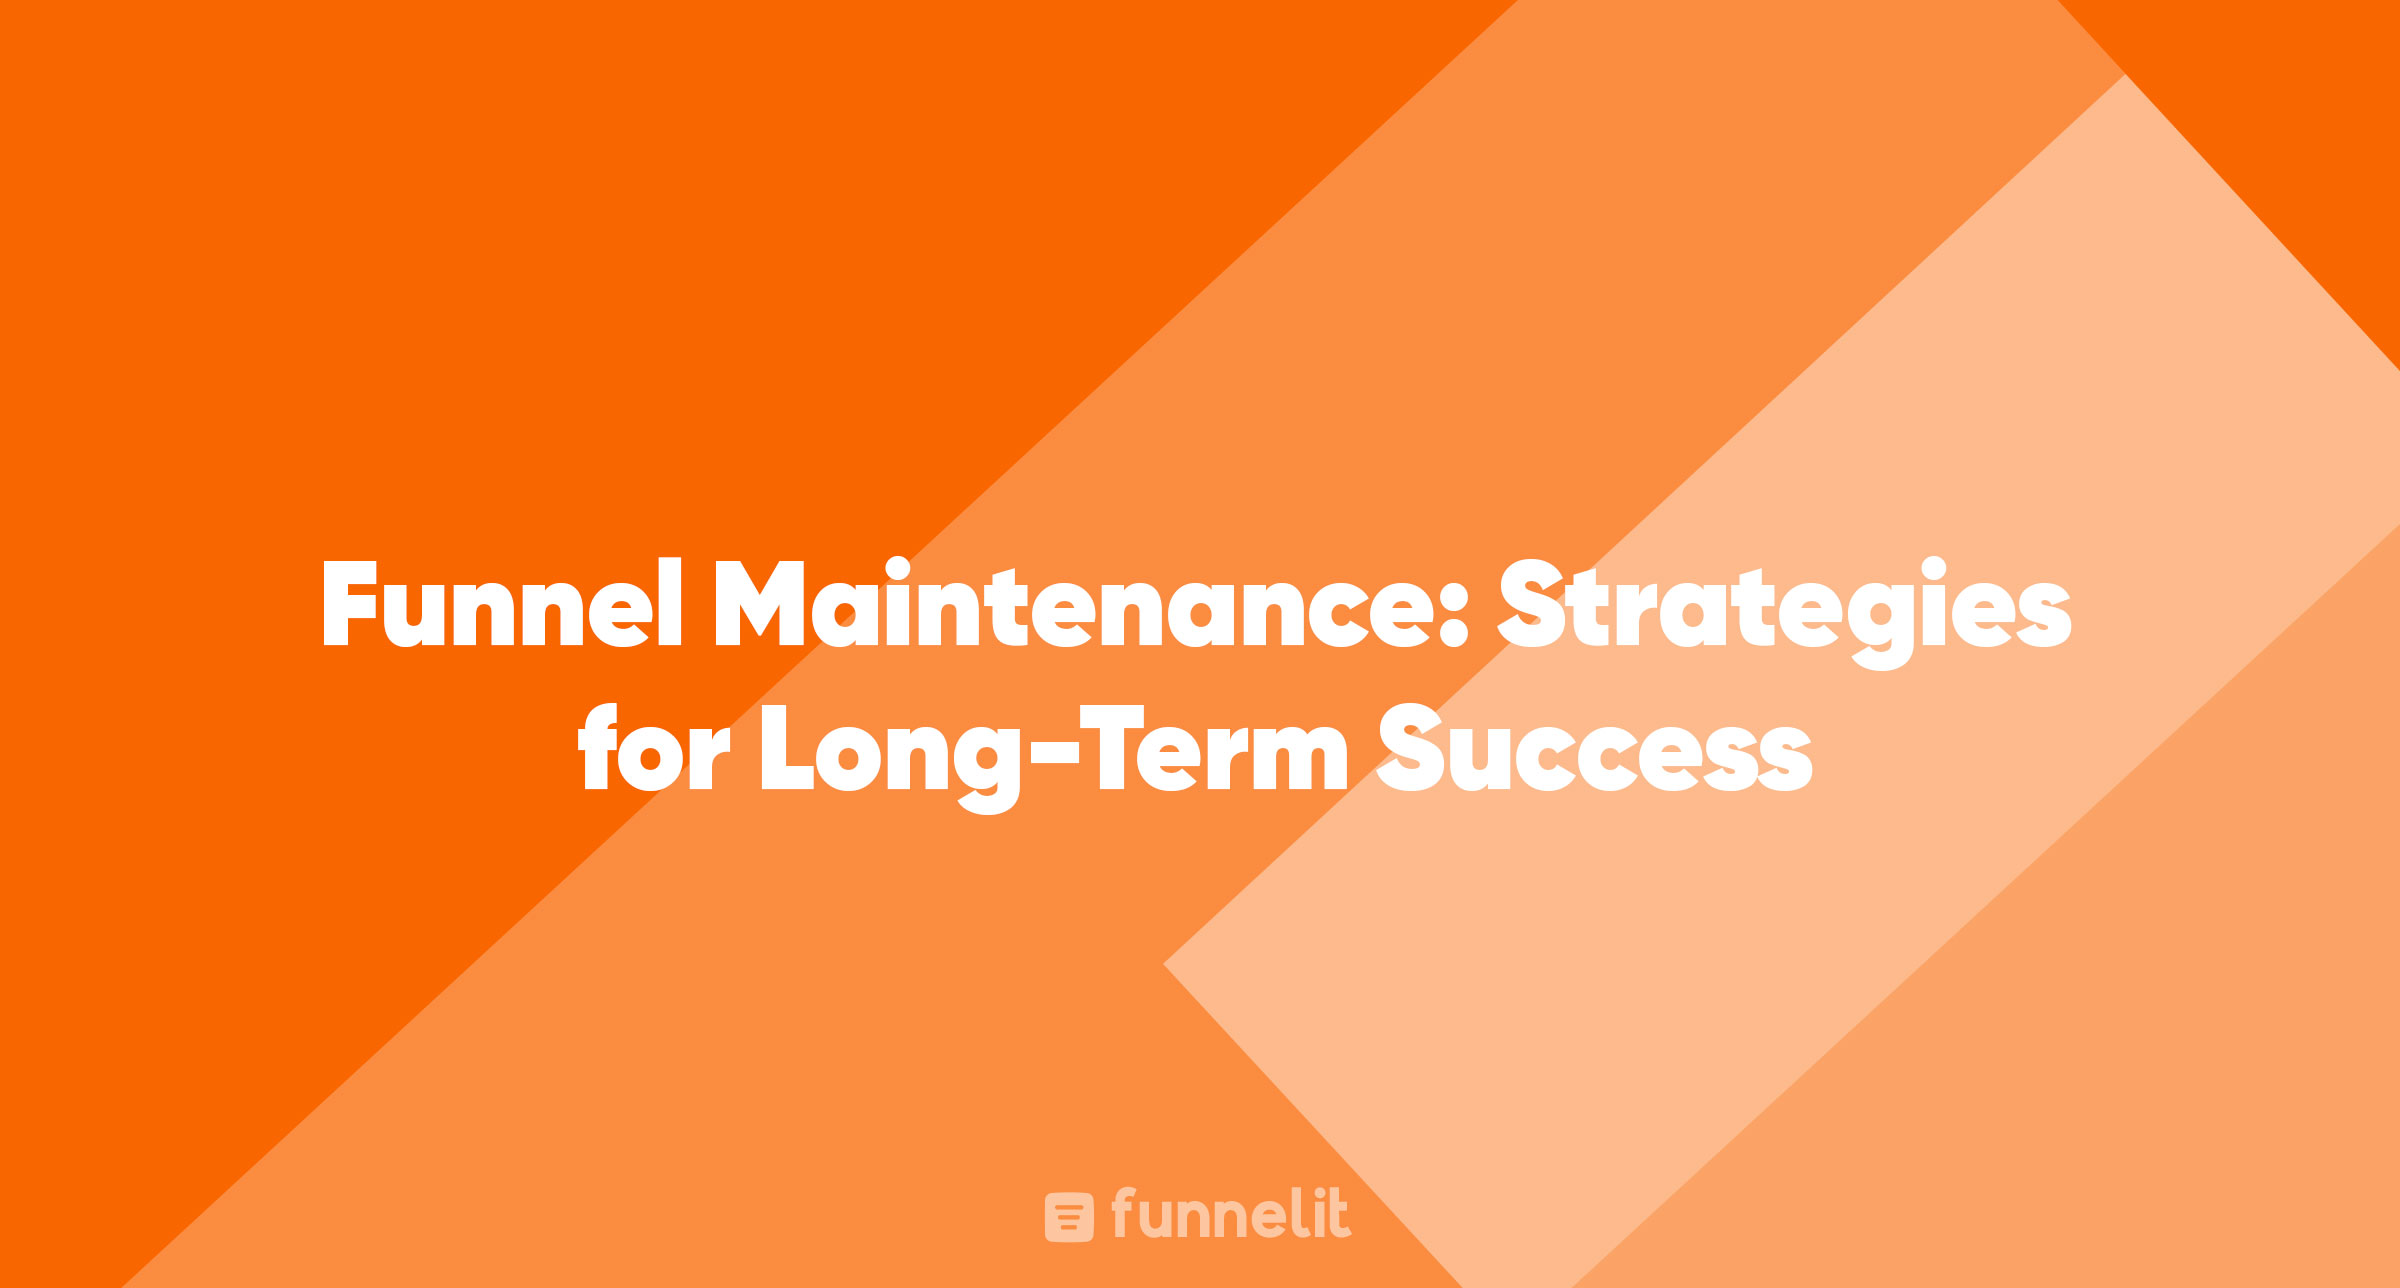 Article | Funnel Maintenance: Strategies for Long-Term Success